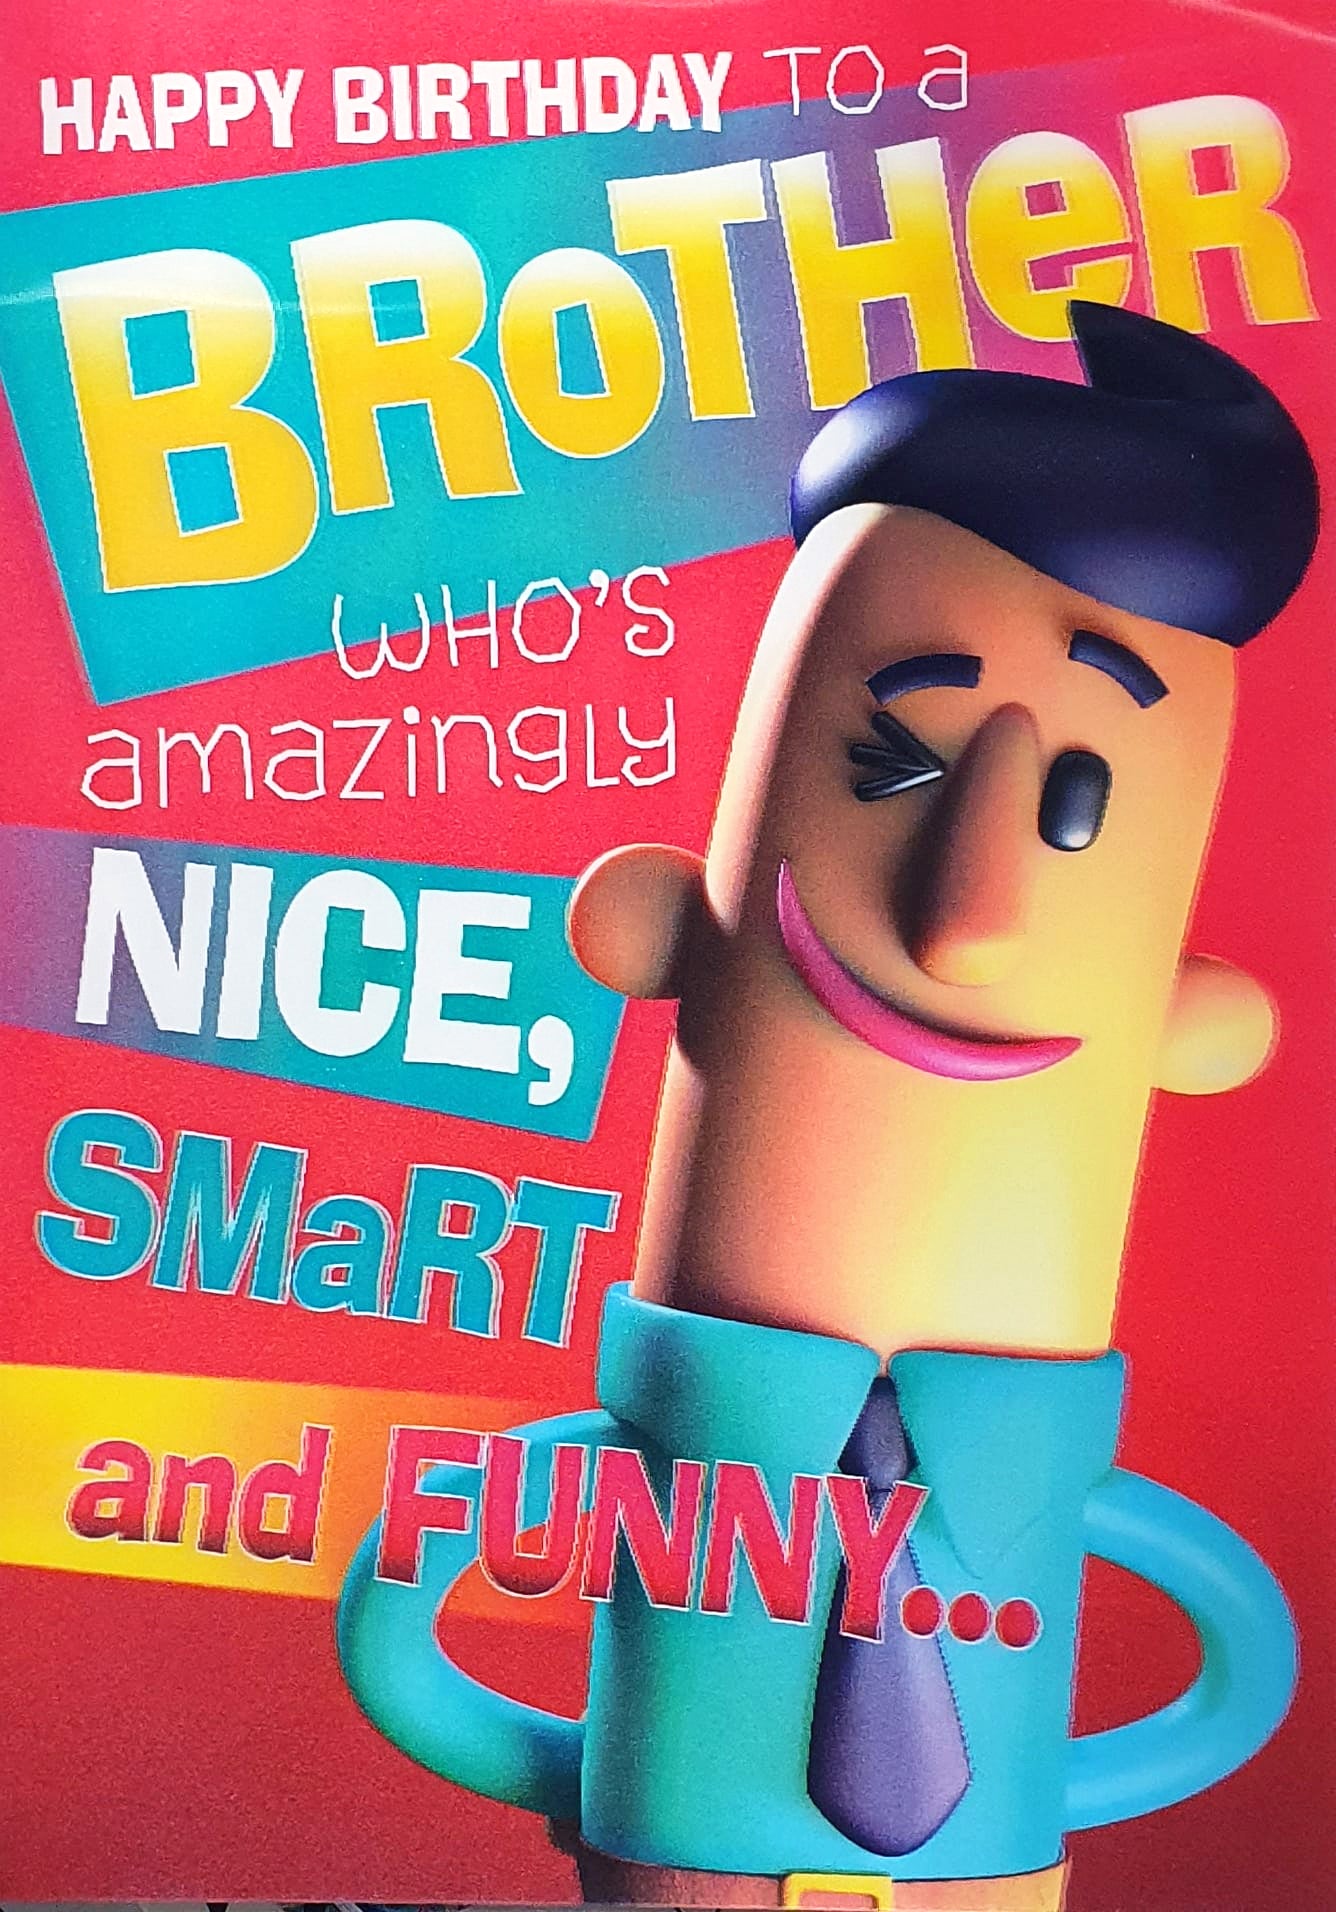 Brother Birthday Card - Nice Smart and Funny